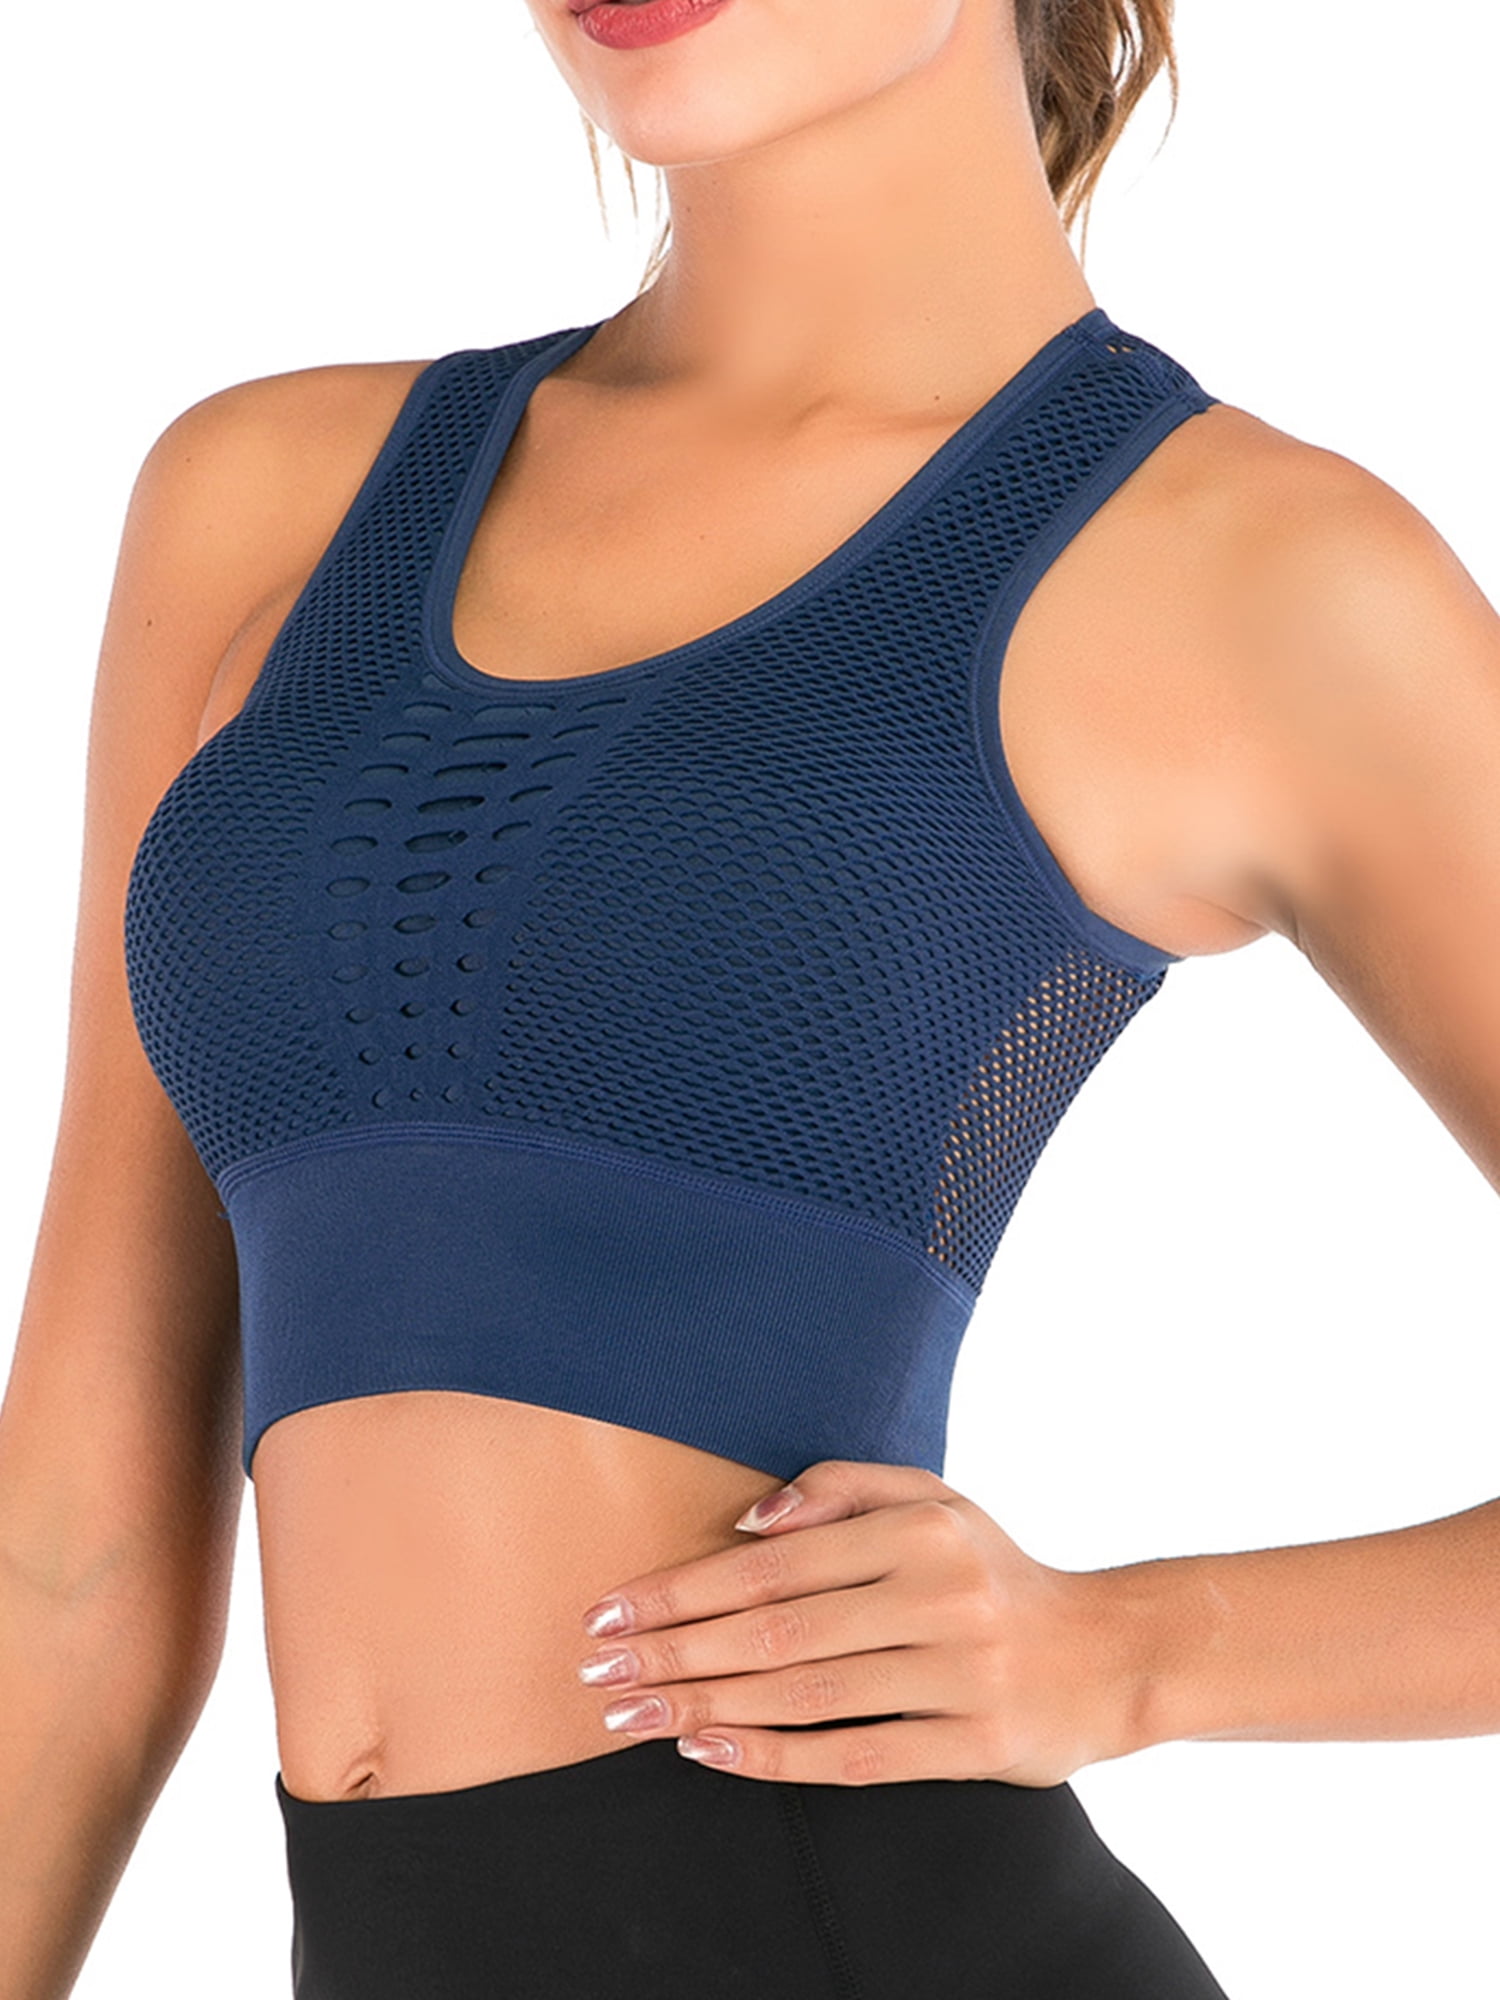 Women Sports Bra Push Up Padded Seamless Tank Tops Fitness Gym Yoga Breathable